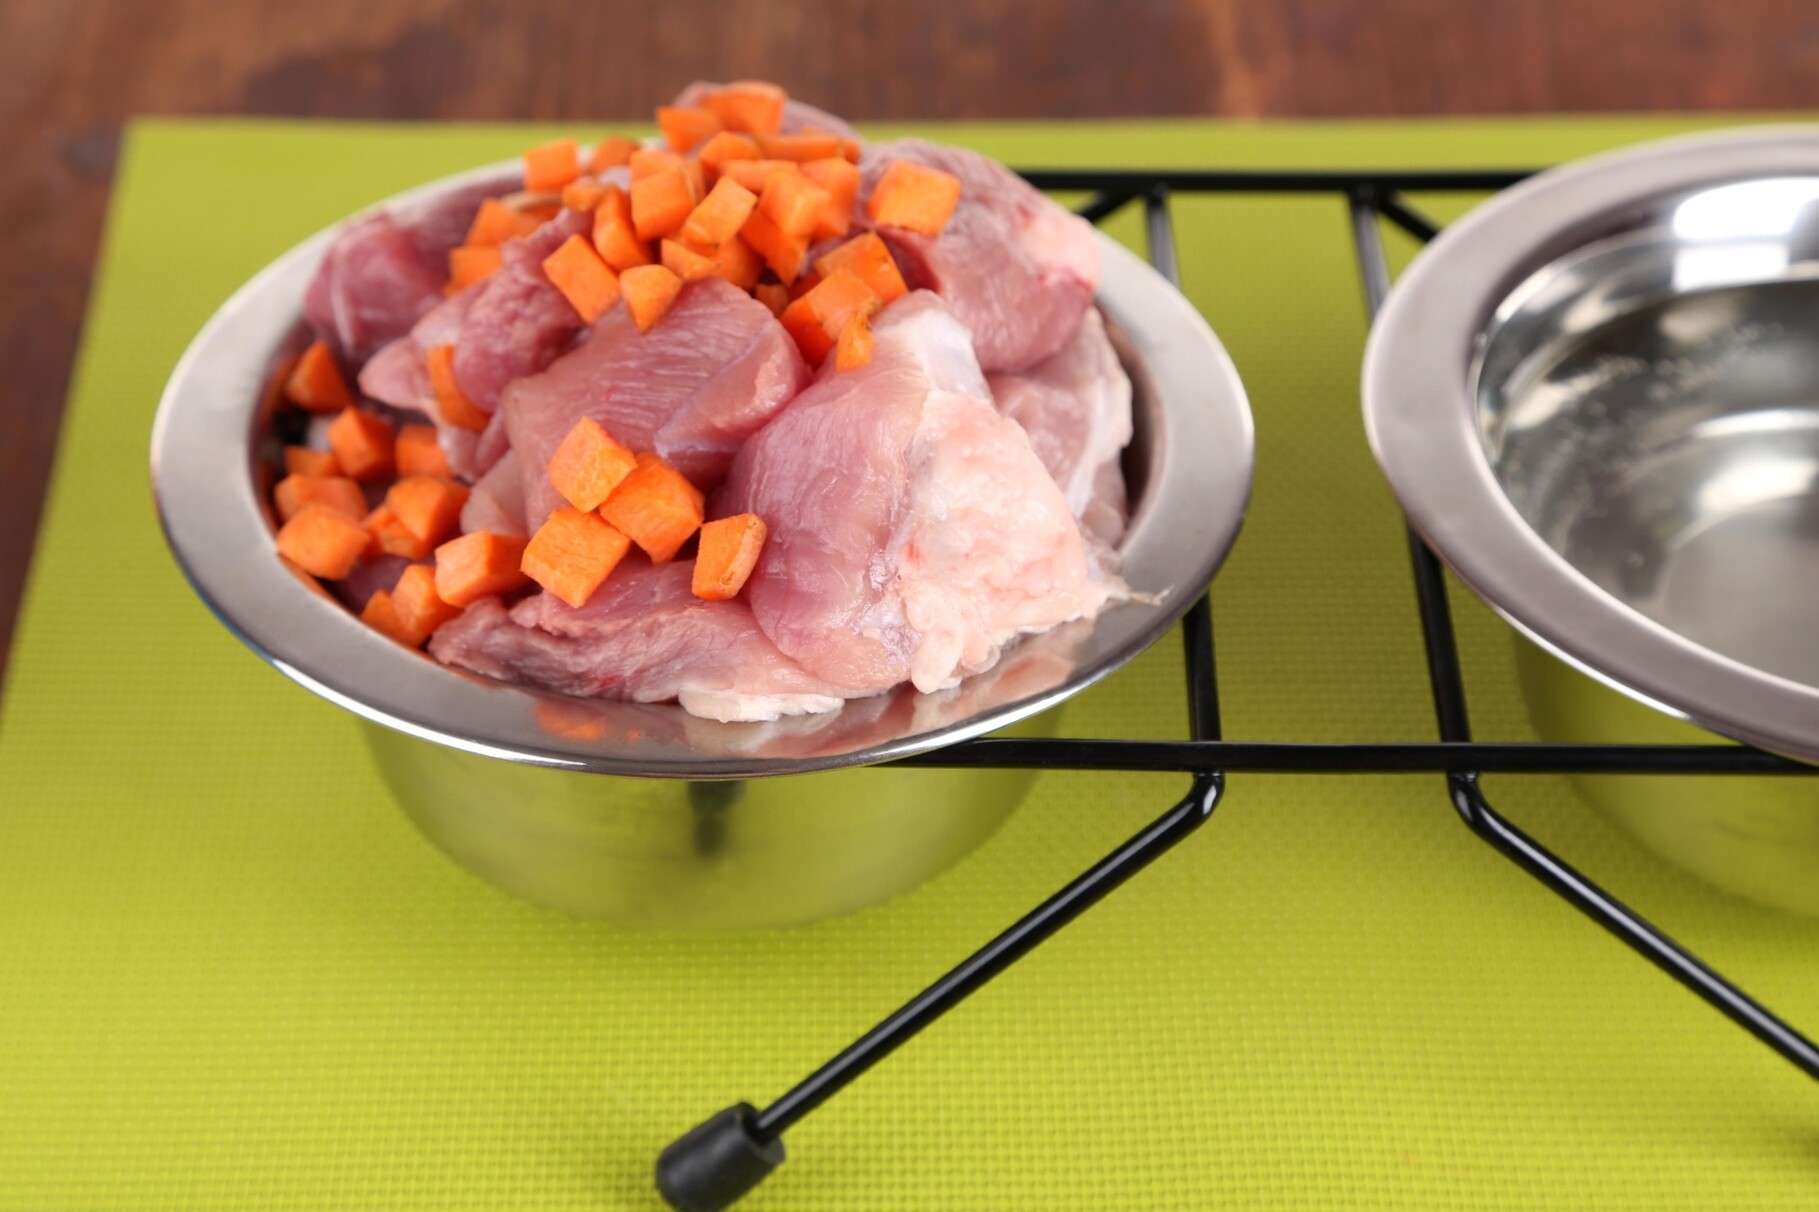 Raw Meat and Chopped Carrots in Metal Pet Bowls on the Floor